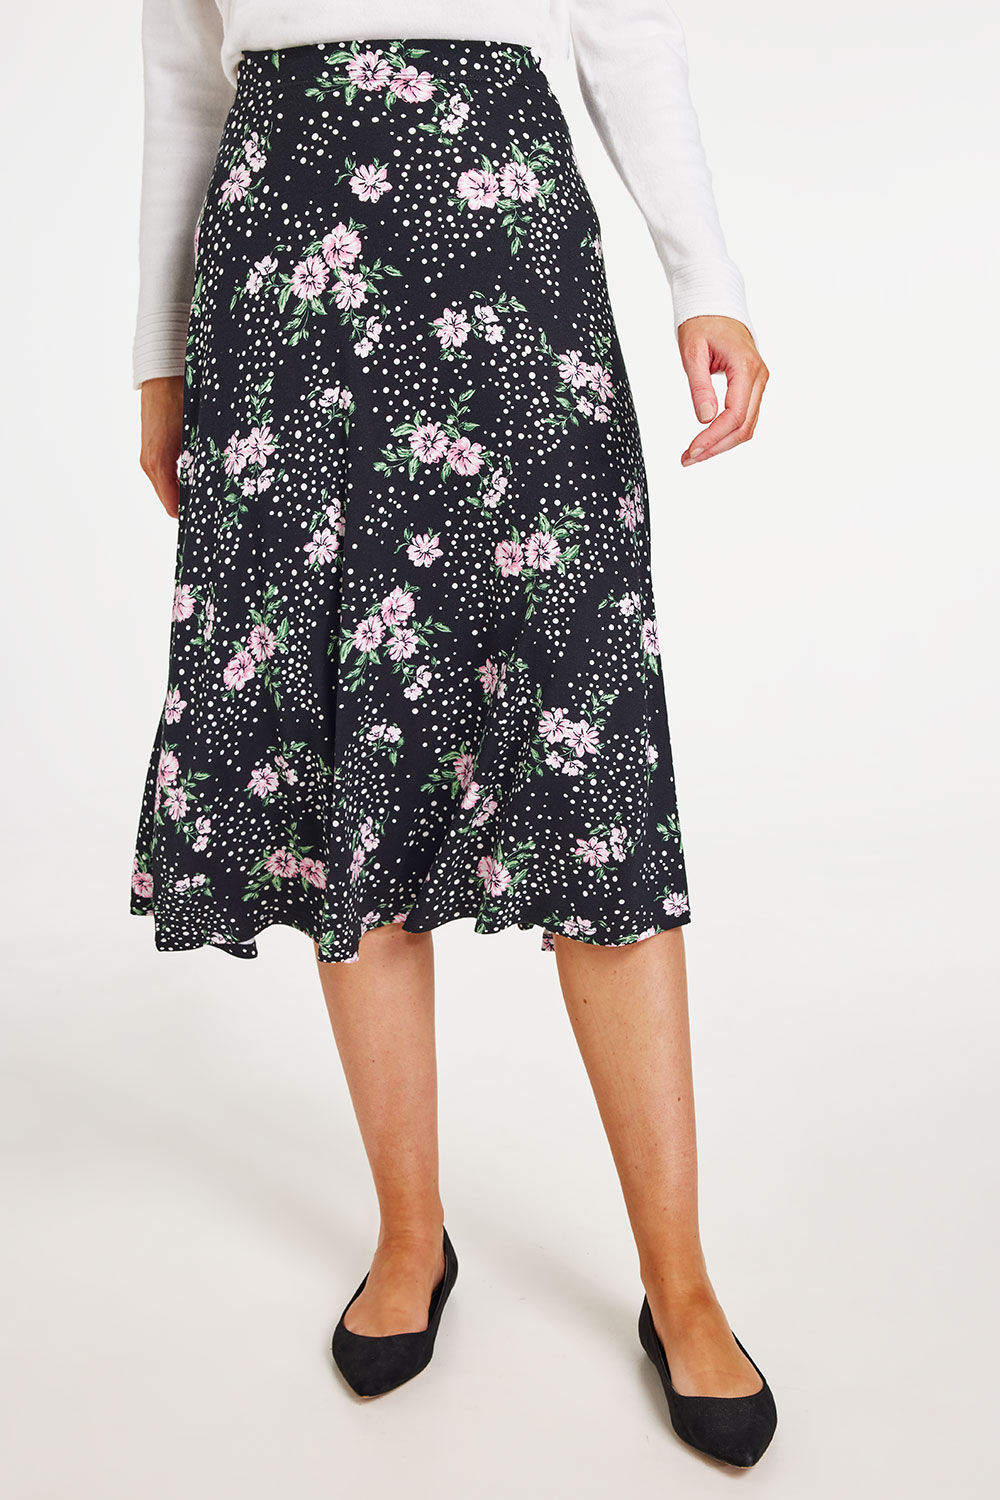 Bonmarche Black Floral and Spot Print Flippy Jersey Elasticated Skirt, Size: 12